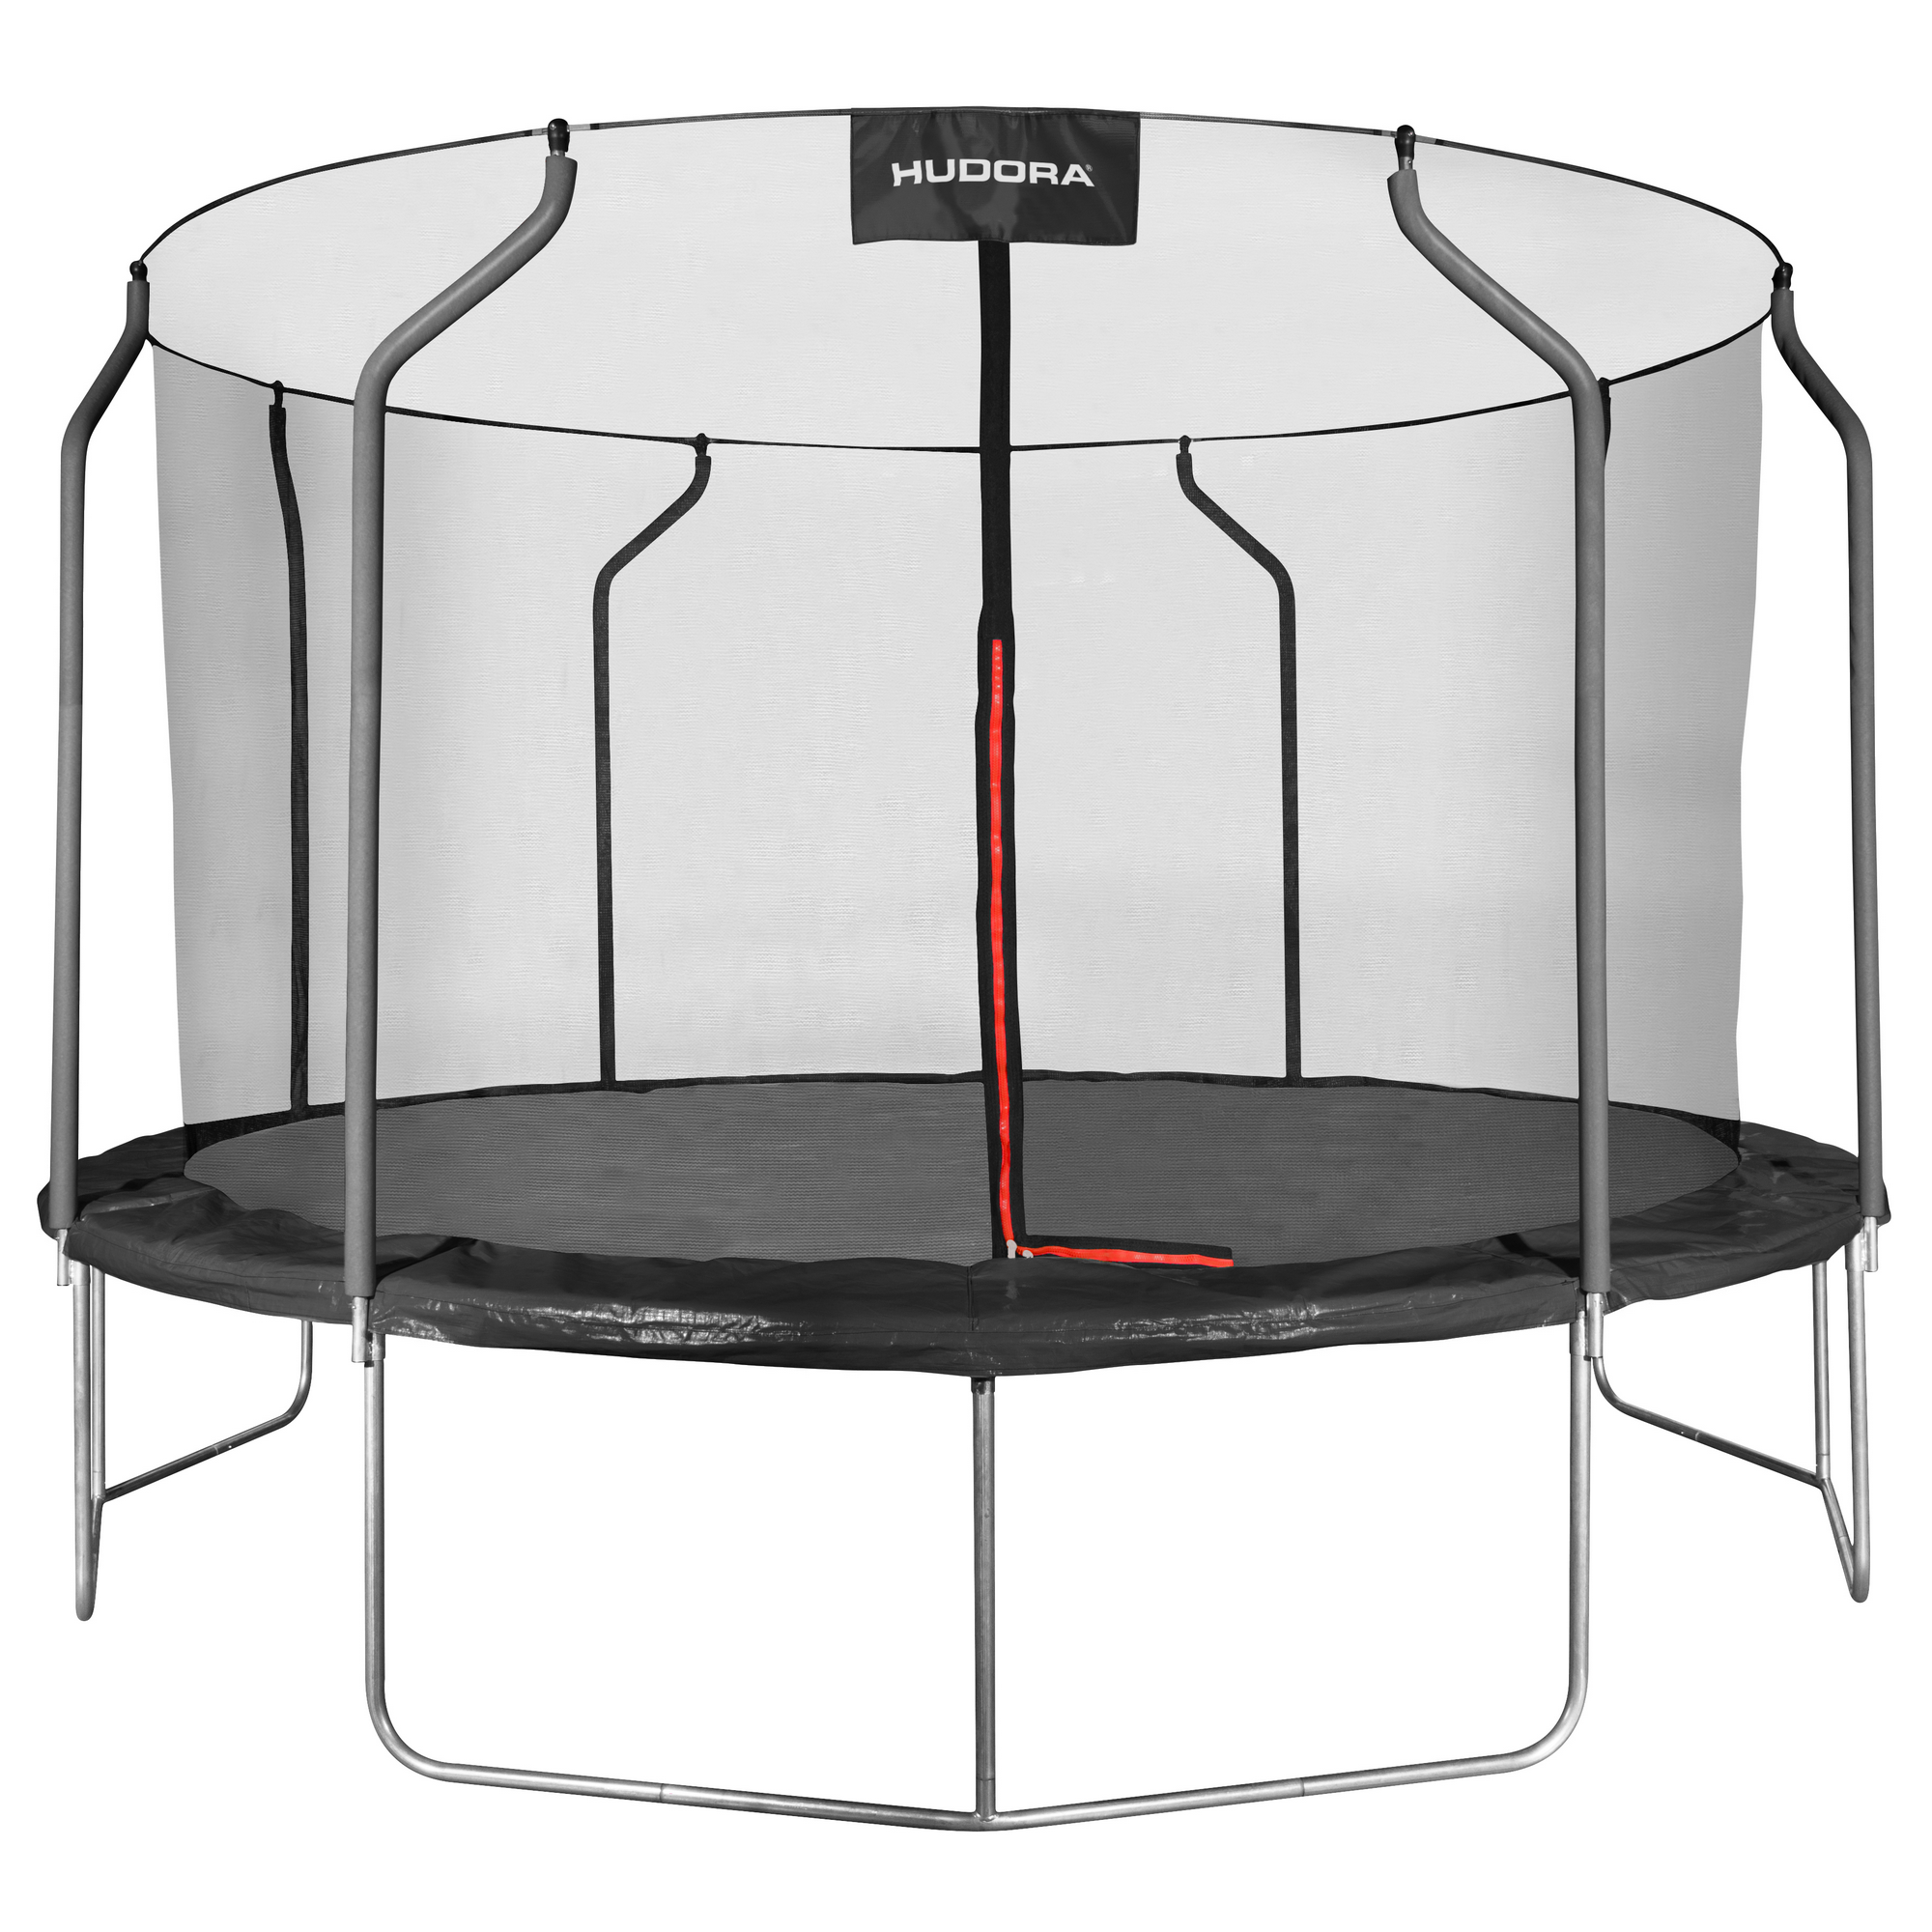 Trampolin 'First 400V' schwarz 400 x 400 x 260 cm + product picture